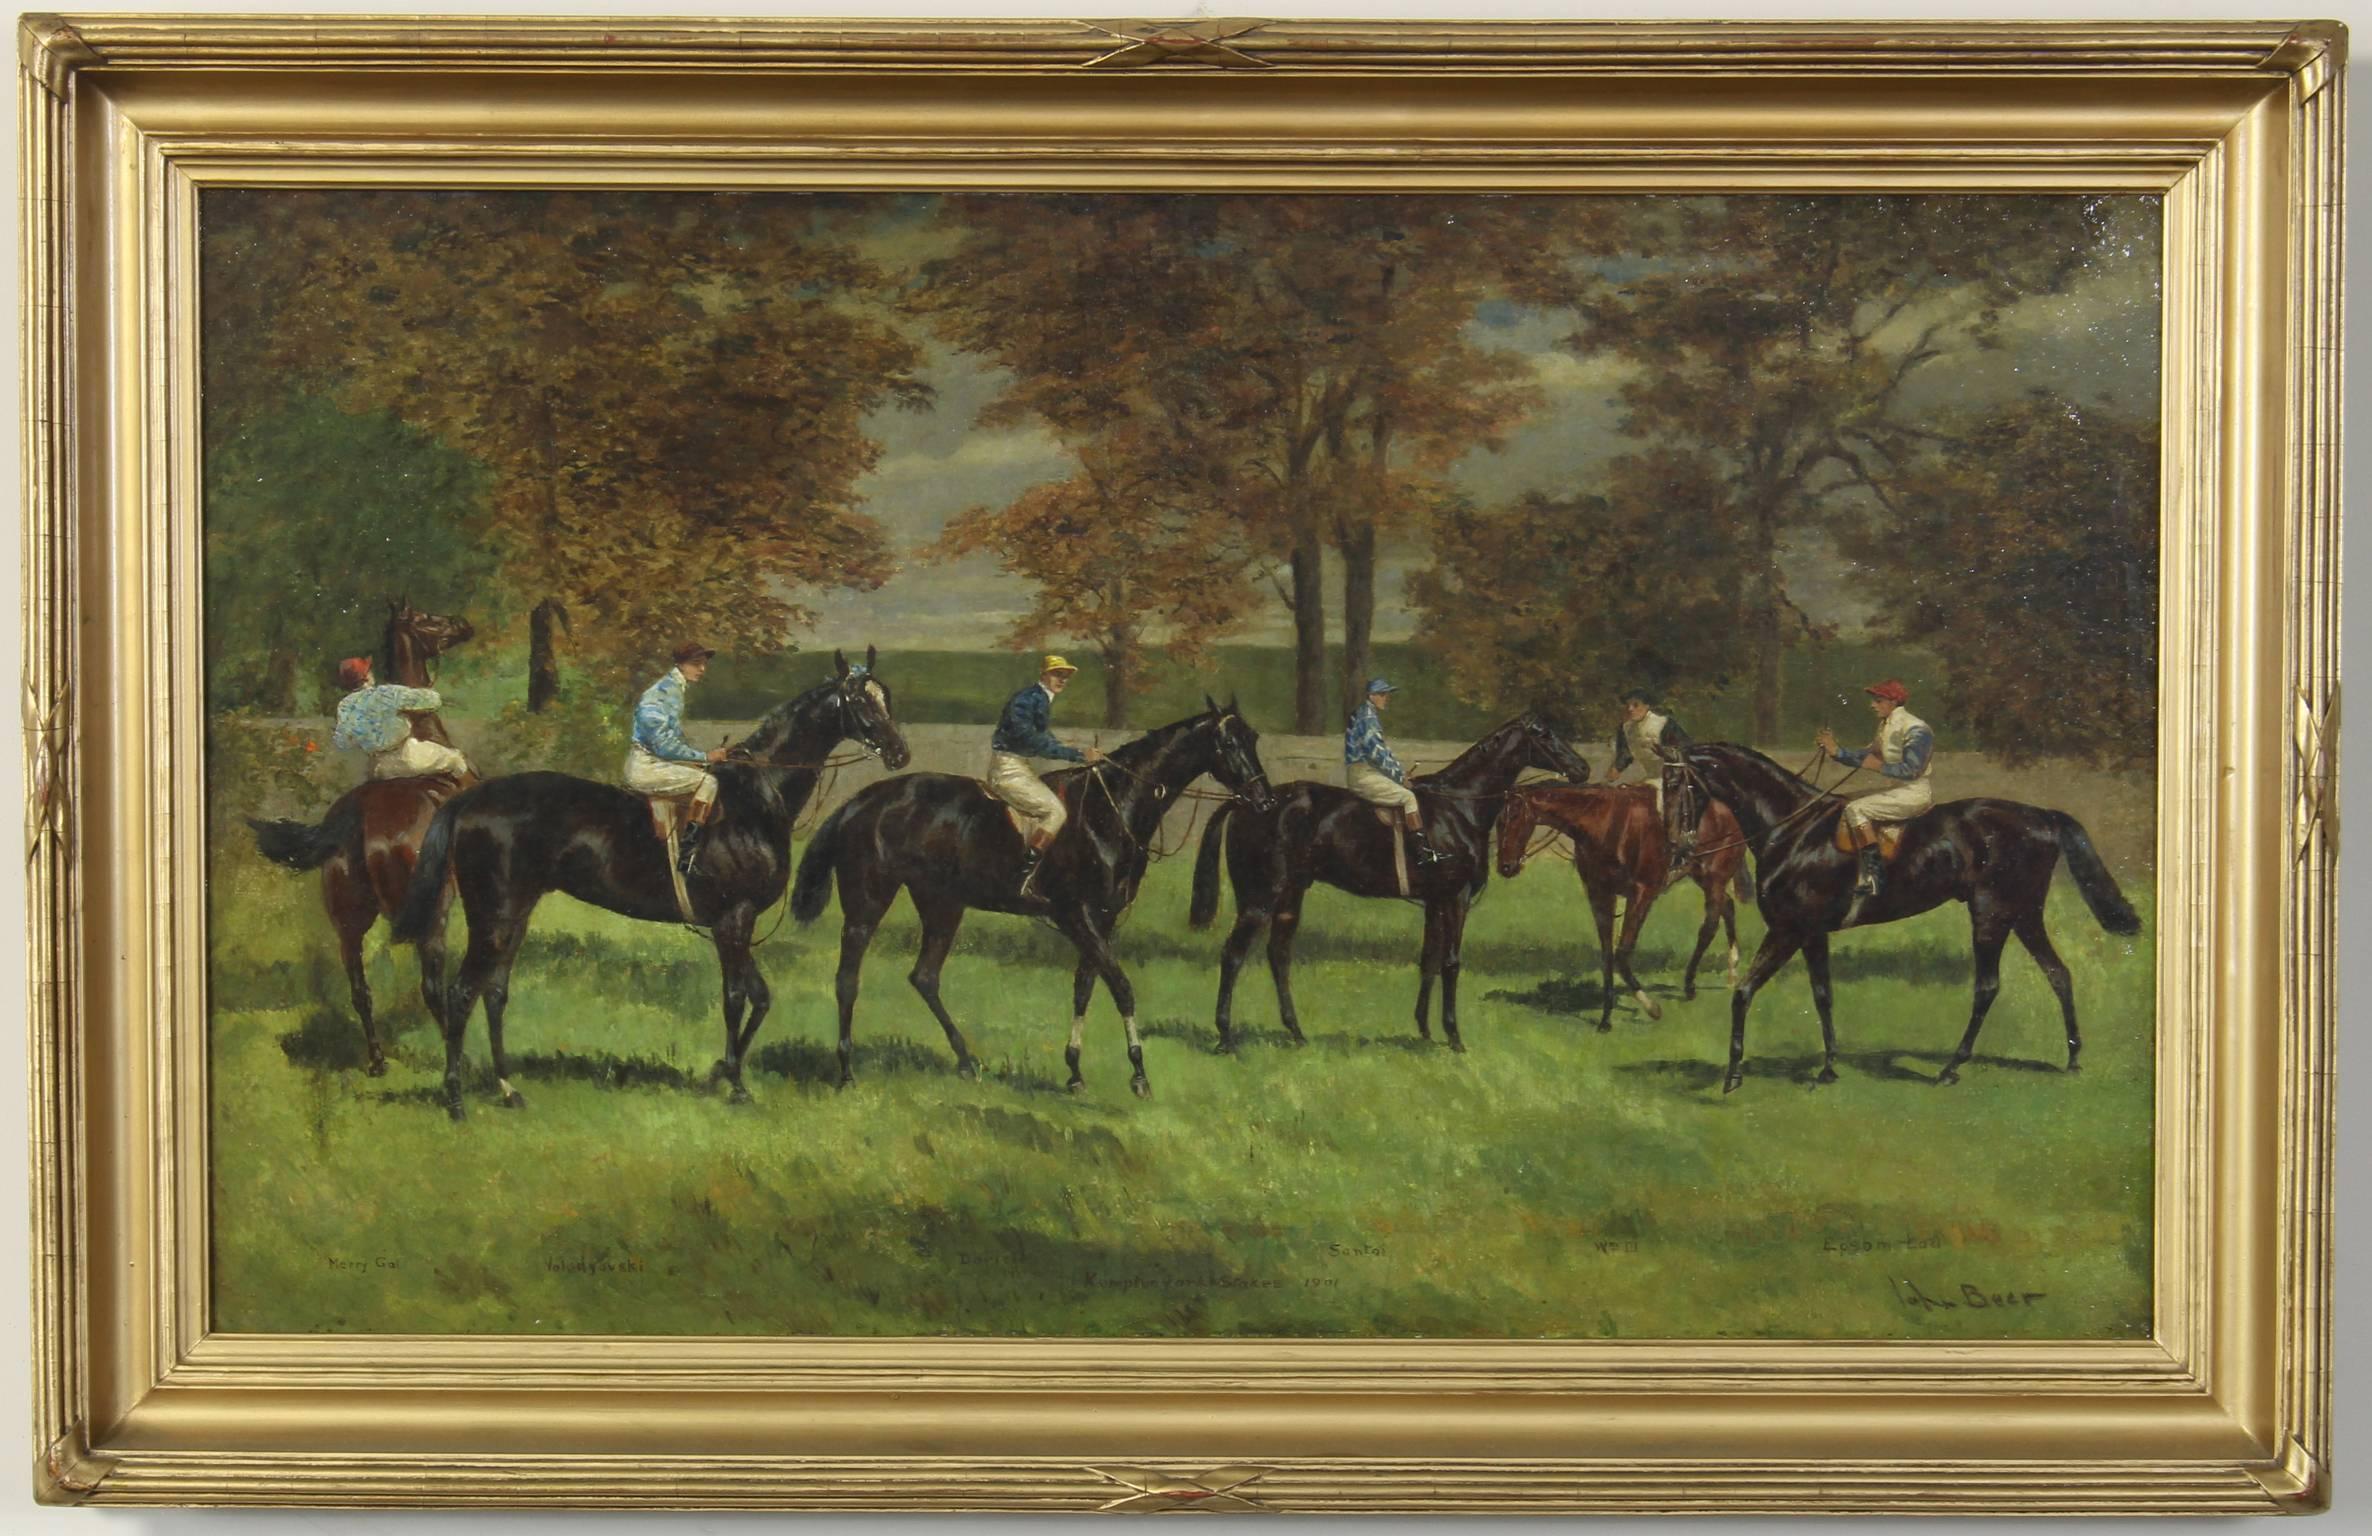 A large and important oil on canvas sporting painting by noted English artist John Beer (1860-1930). The painting names each horse depicted and is titled 